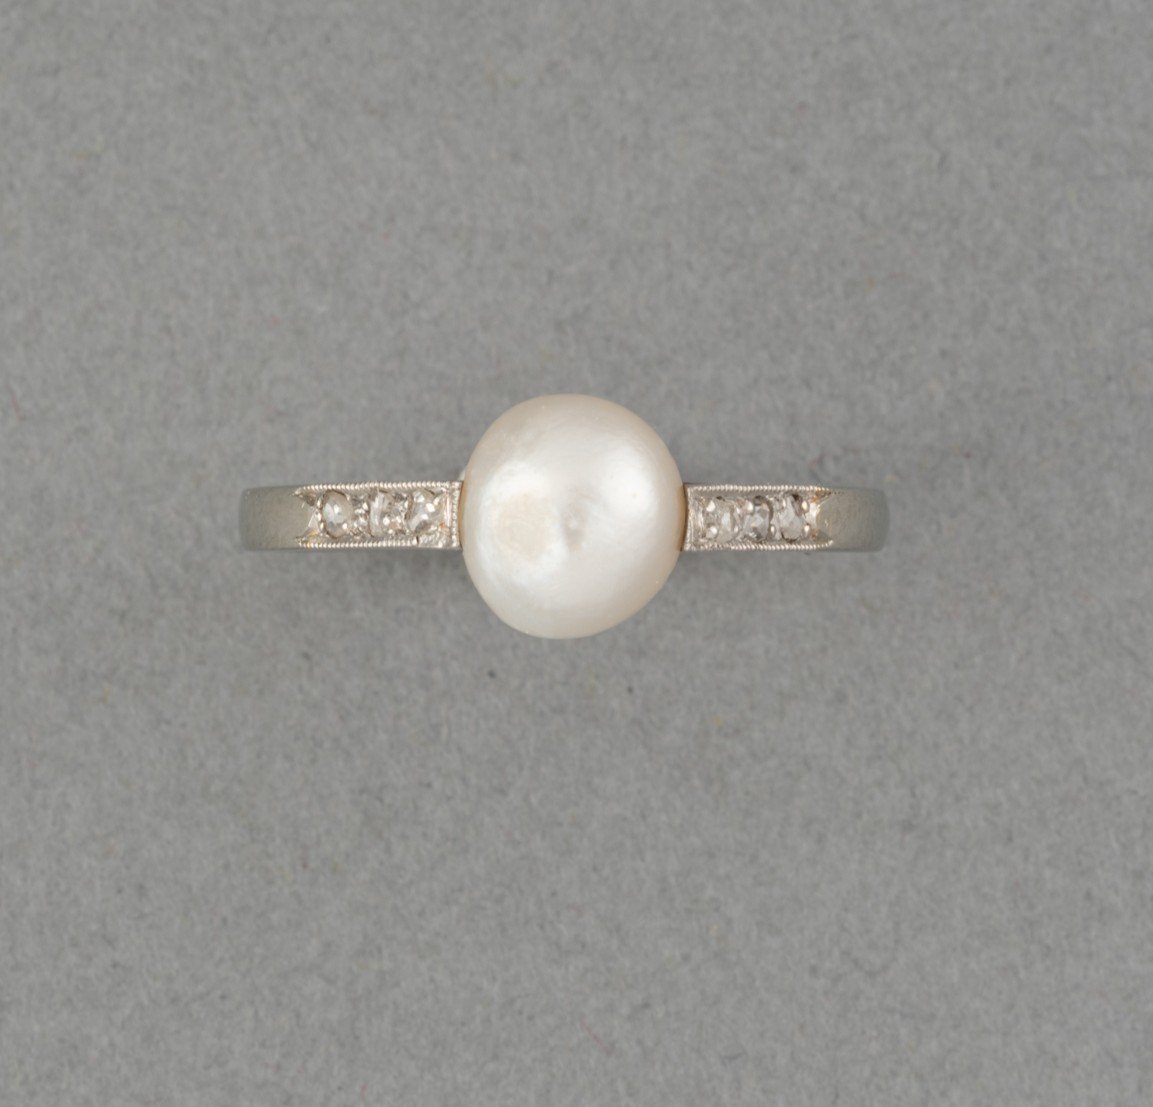 Old Gold Ring With Diamonds And Natural Pearl